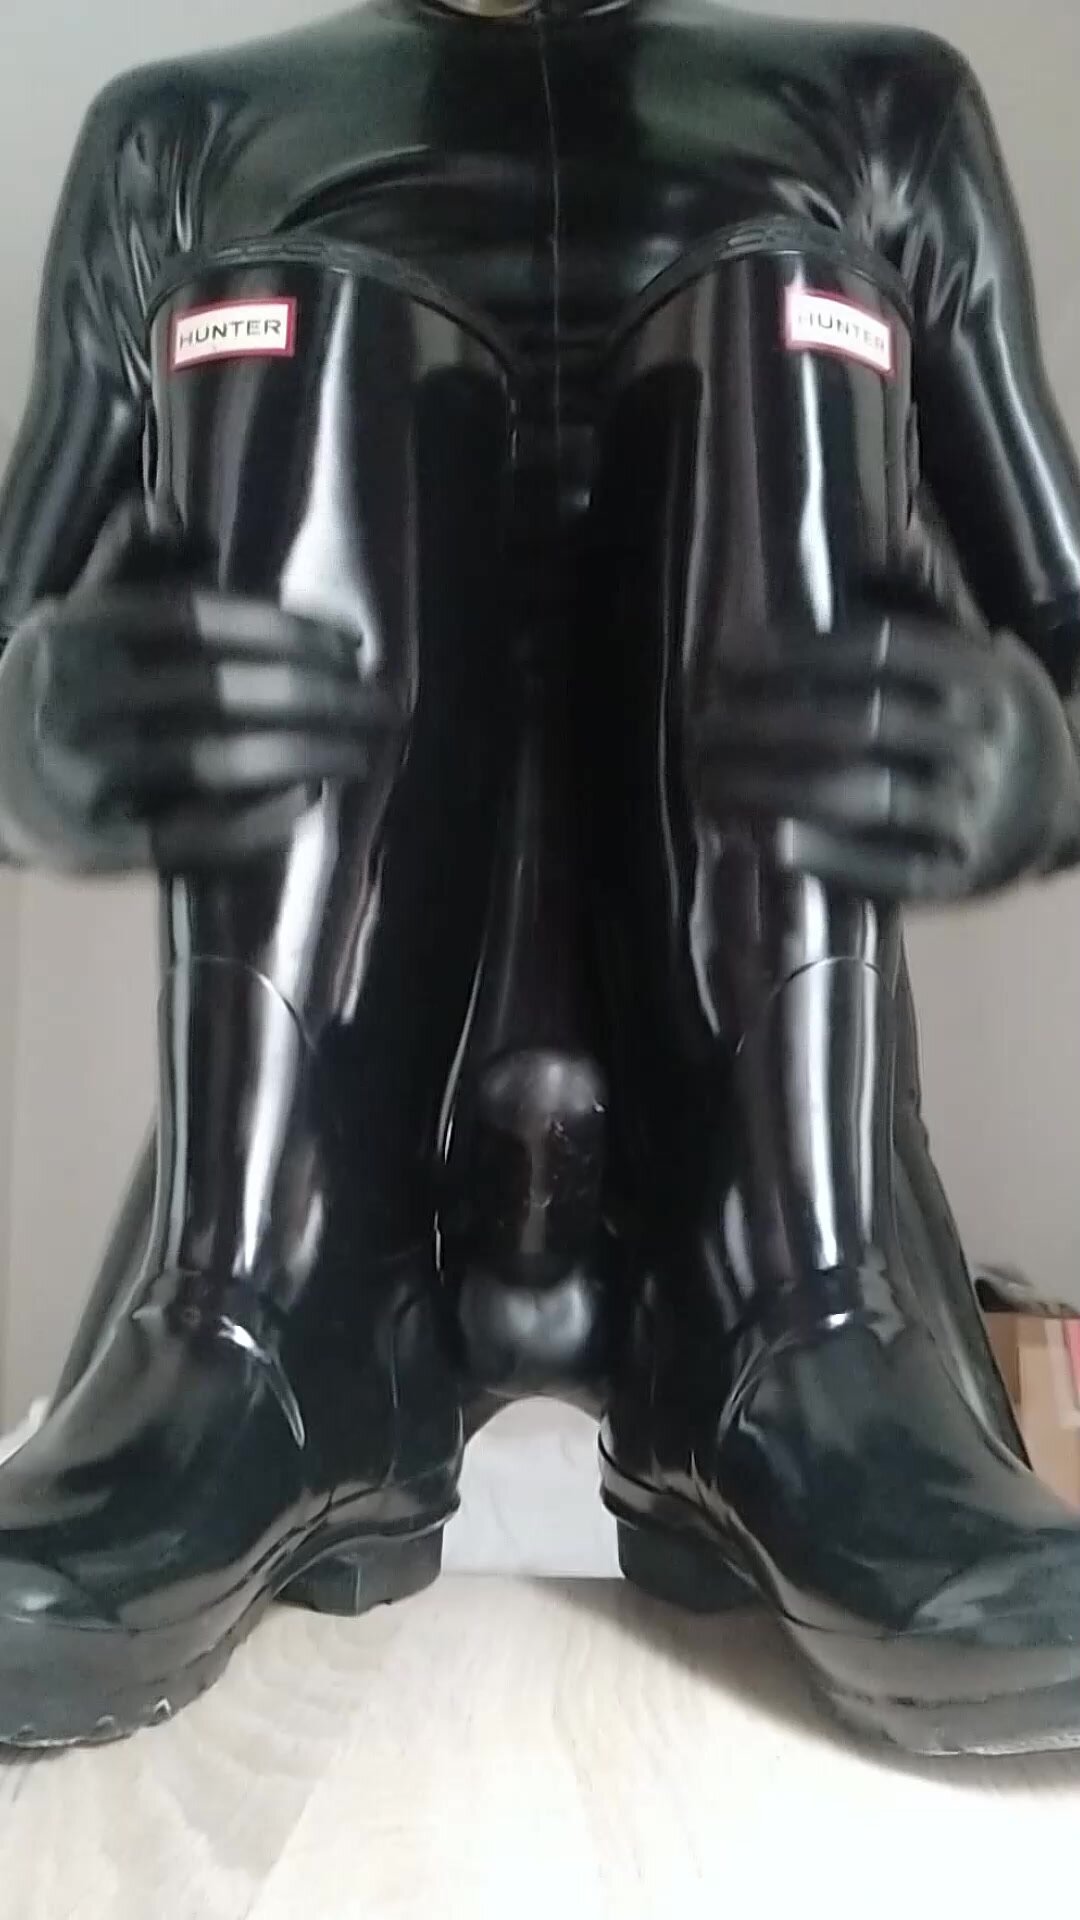 Play with shiny rubber boots